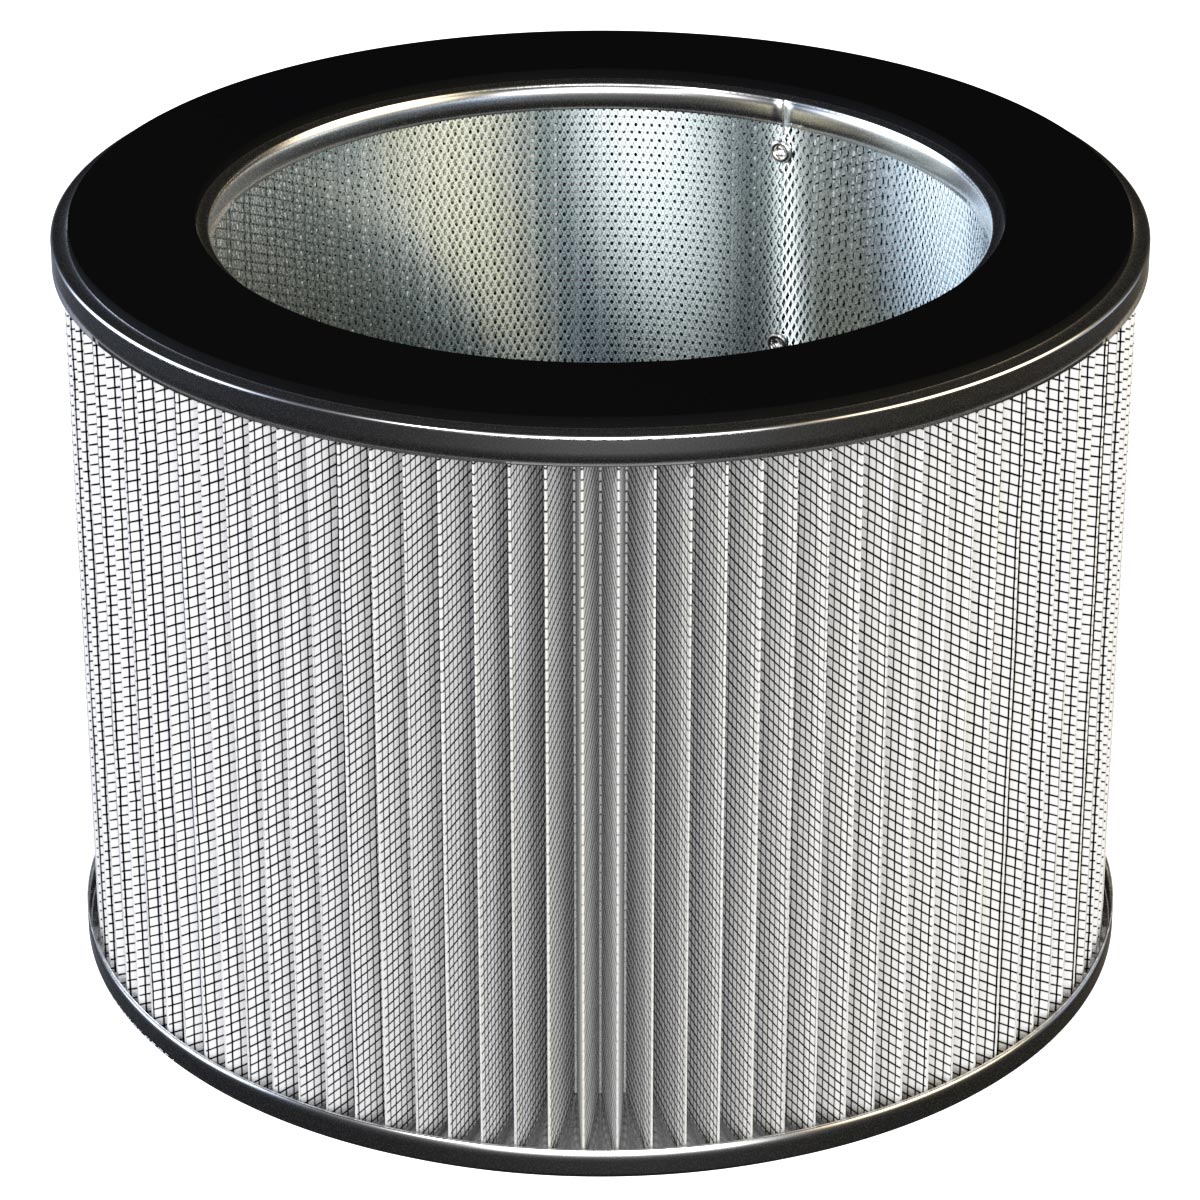 Blower Replacement 4 Height Made in the USA 9-3/4 Outer Diameter Solberg 32-05 Polyester Filter Cartridge 7-1/4 Inner Diameter 